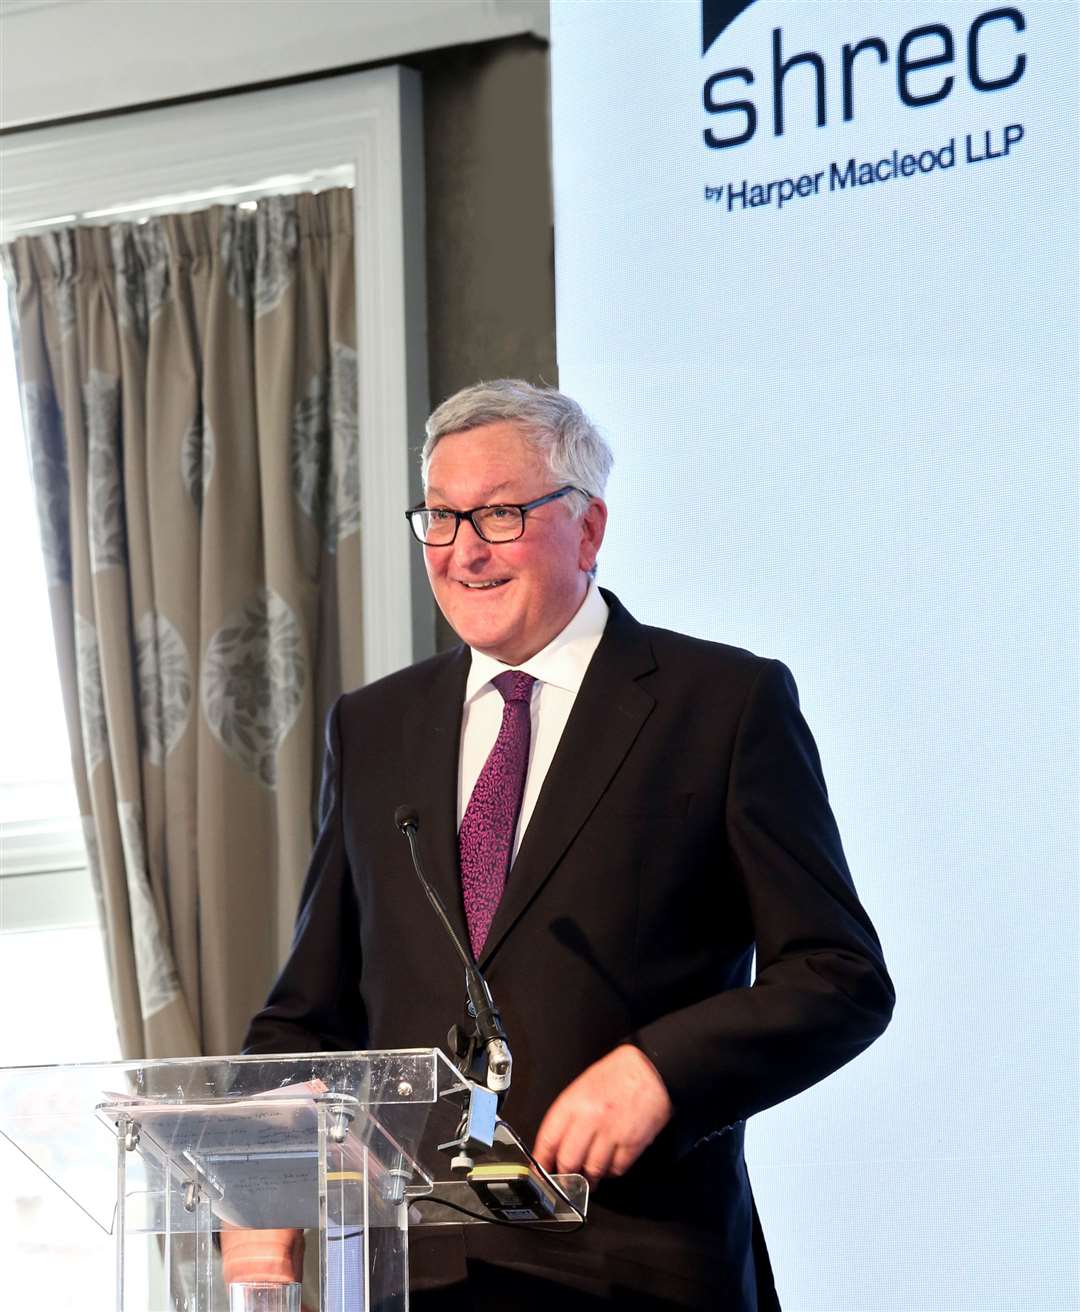 Scotland’s rural economy minister Fergus Ewing at last year’s SHREC conference.